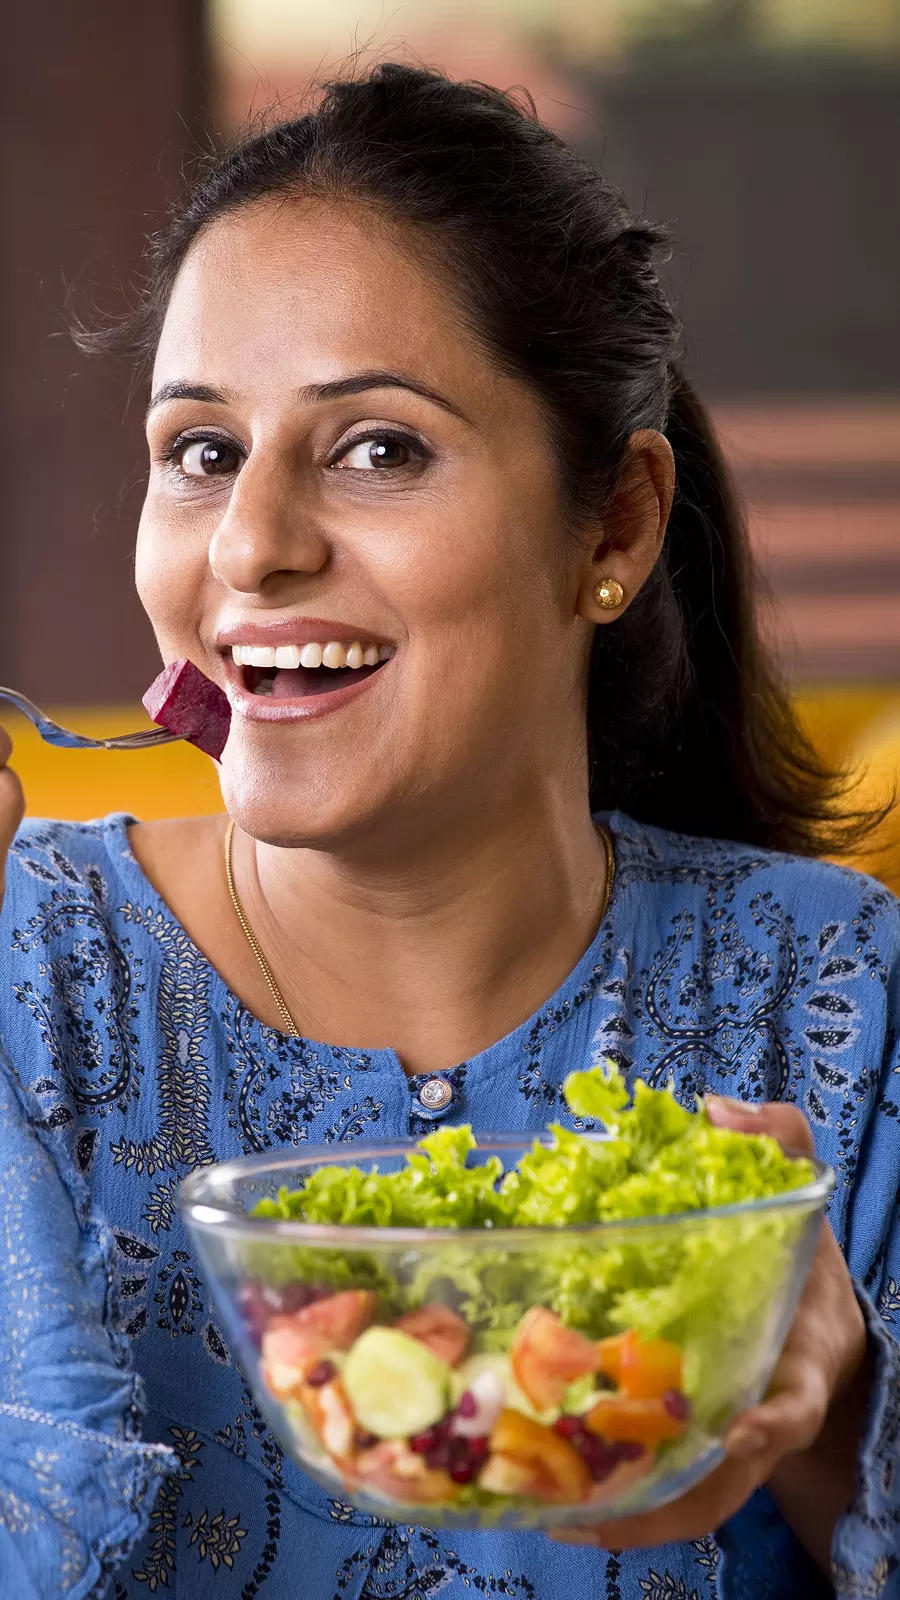 Snacks : Low-calorie snacks for a great evening | EconomicTimes